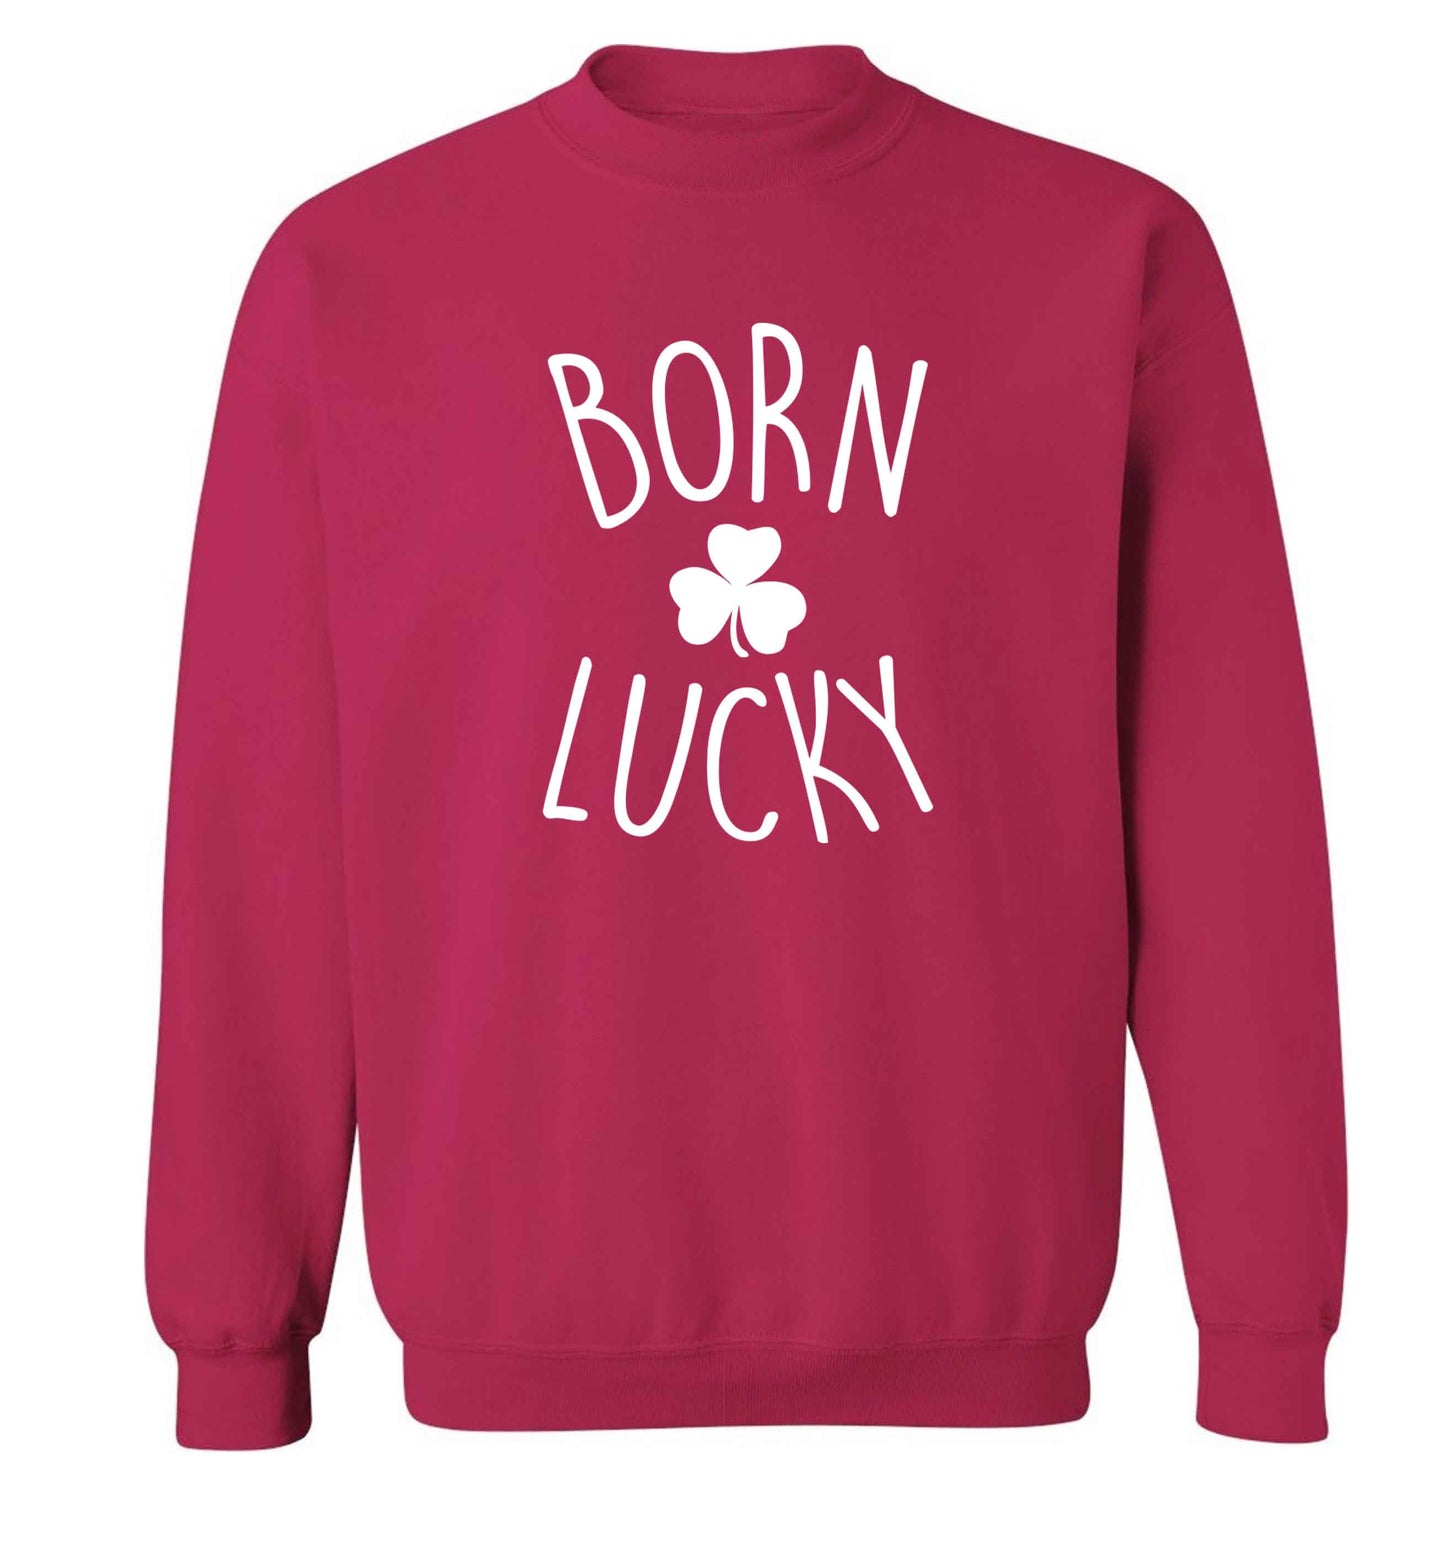 Born Lucky adult's unisex pink sweater 2XL